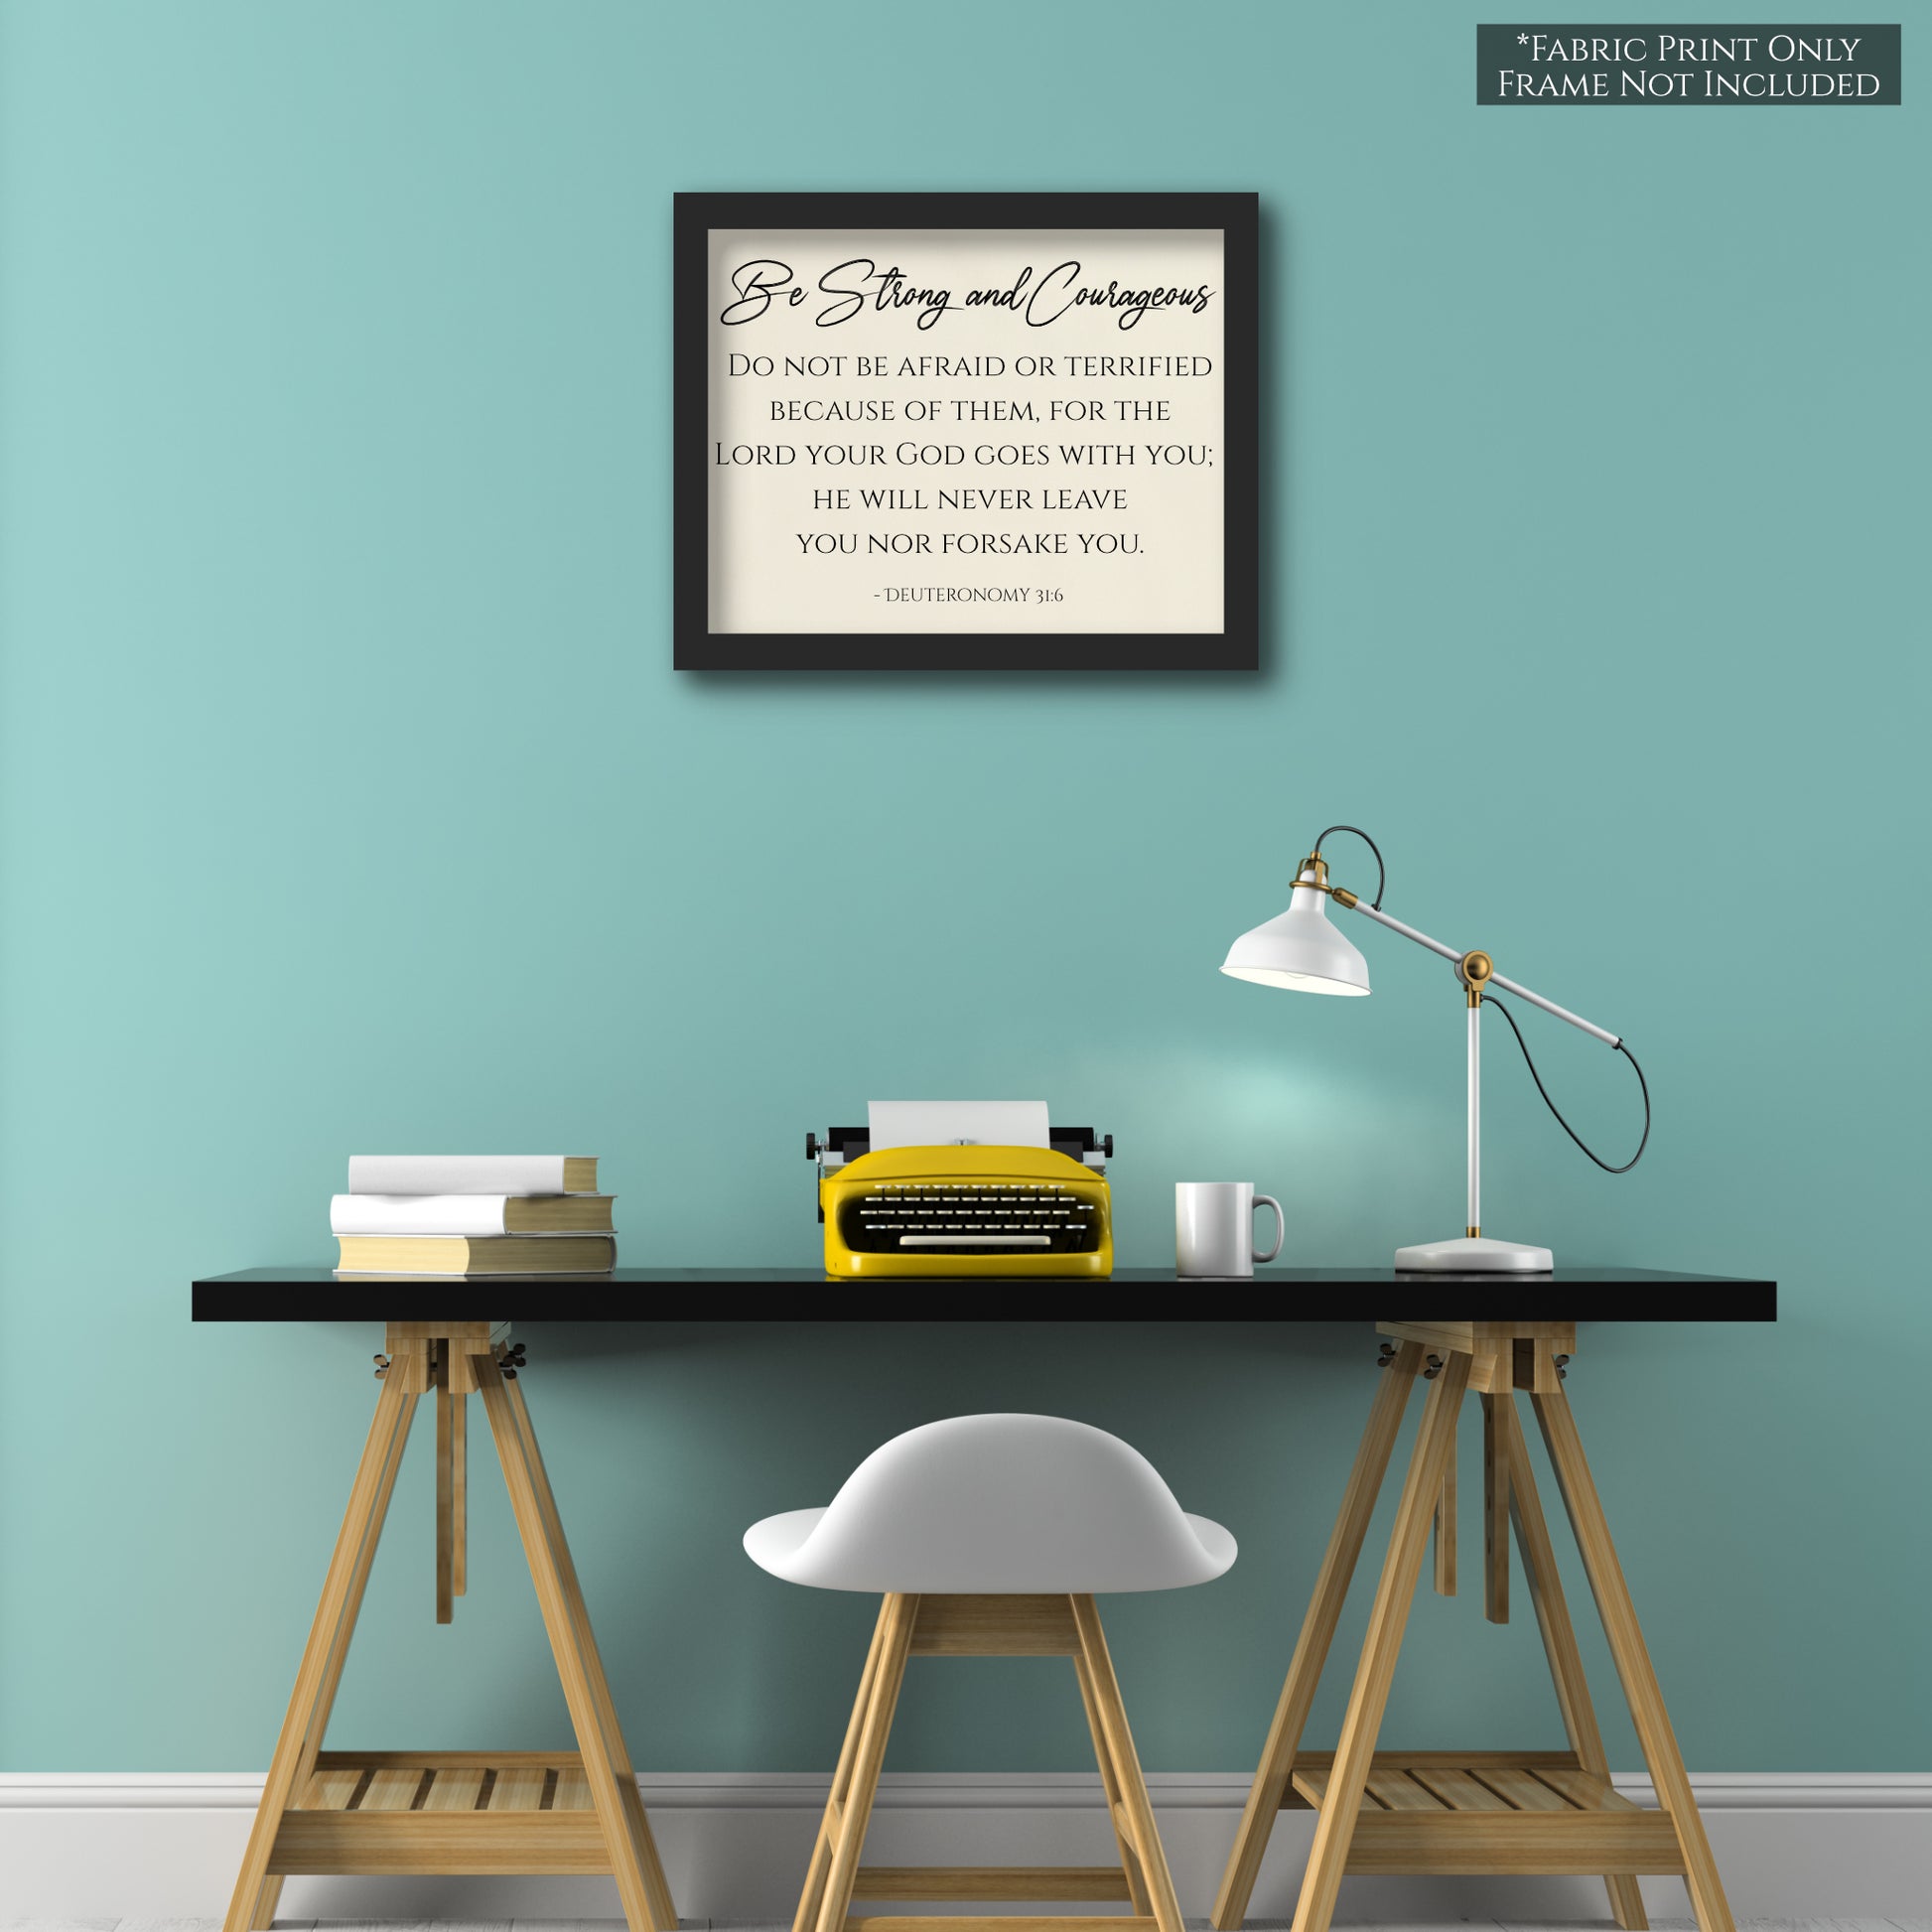 Deuteronomy 31 6 - Be Strong and Courageous - Christian Wall Art